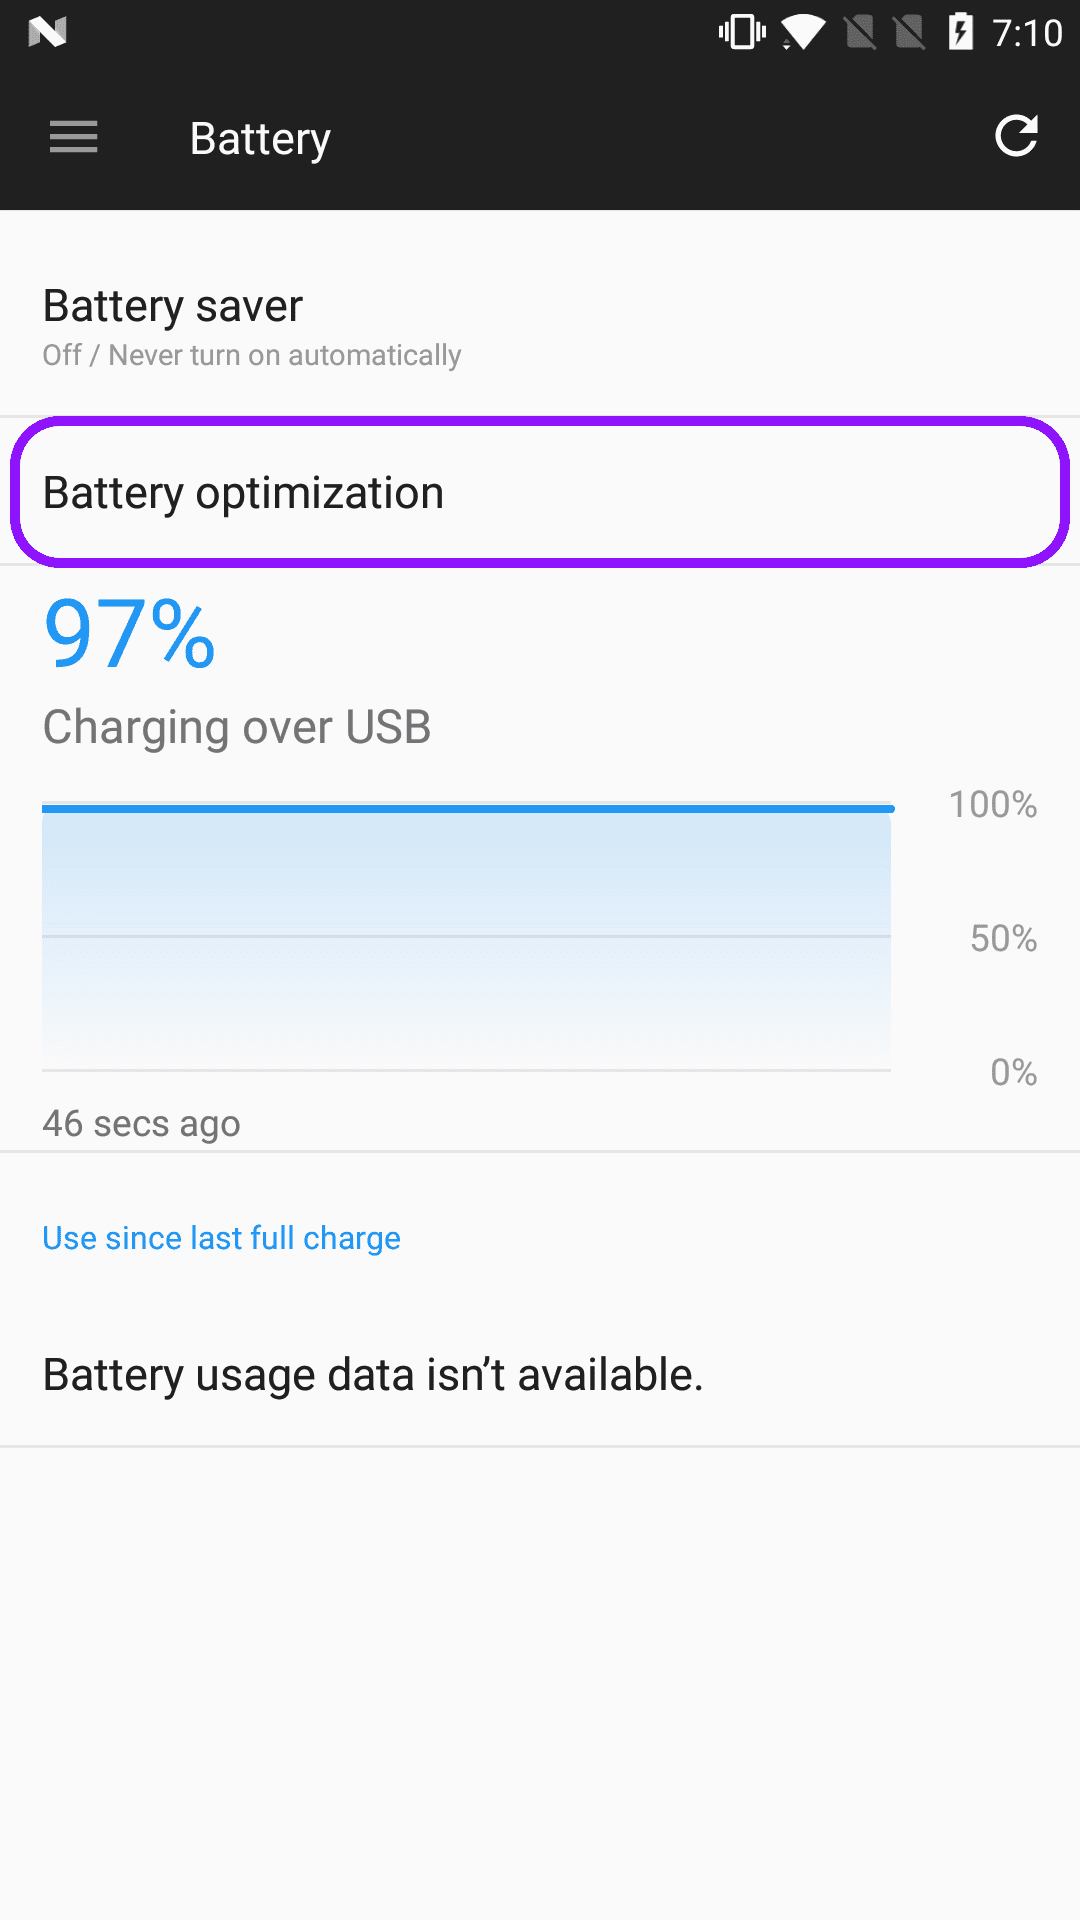 What is Optimized Battery Charging on Android?